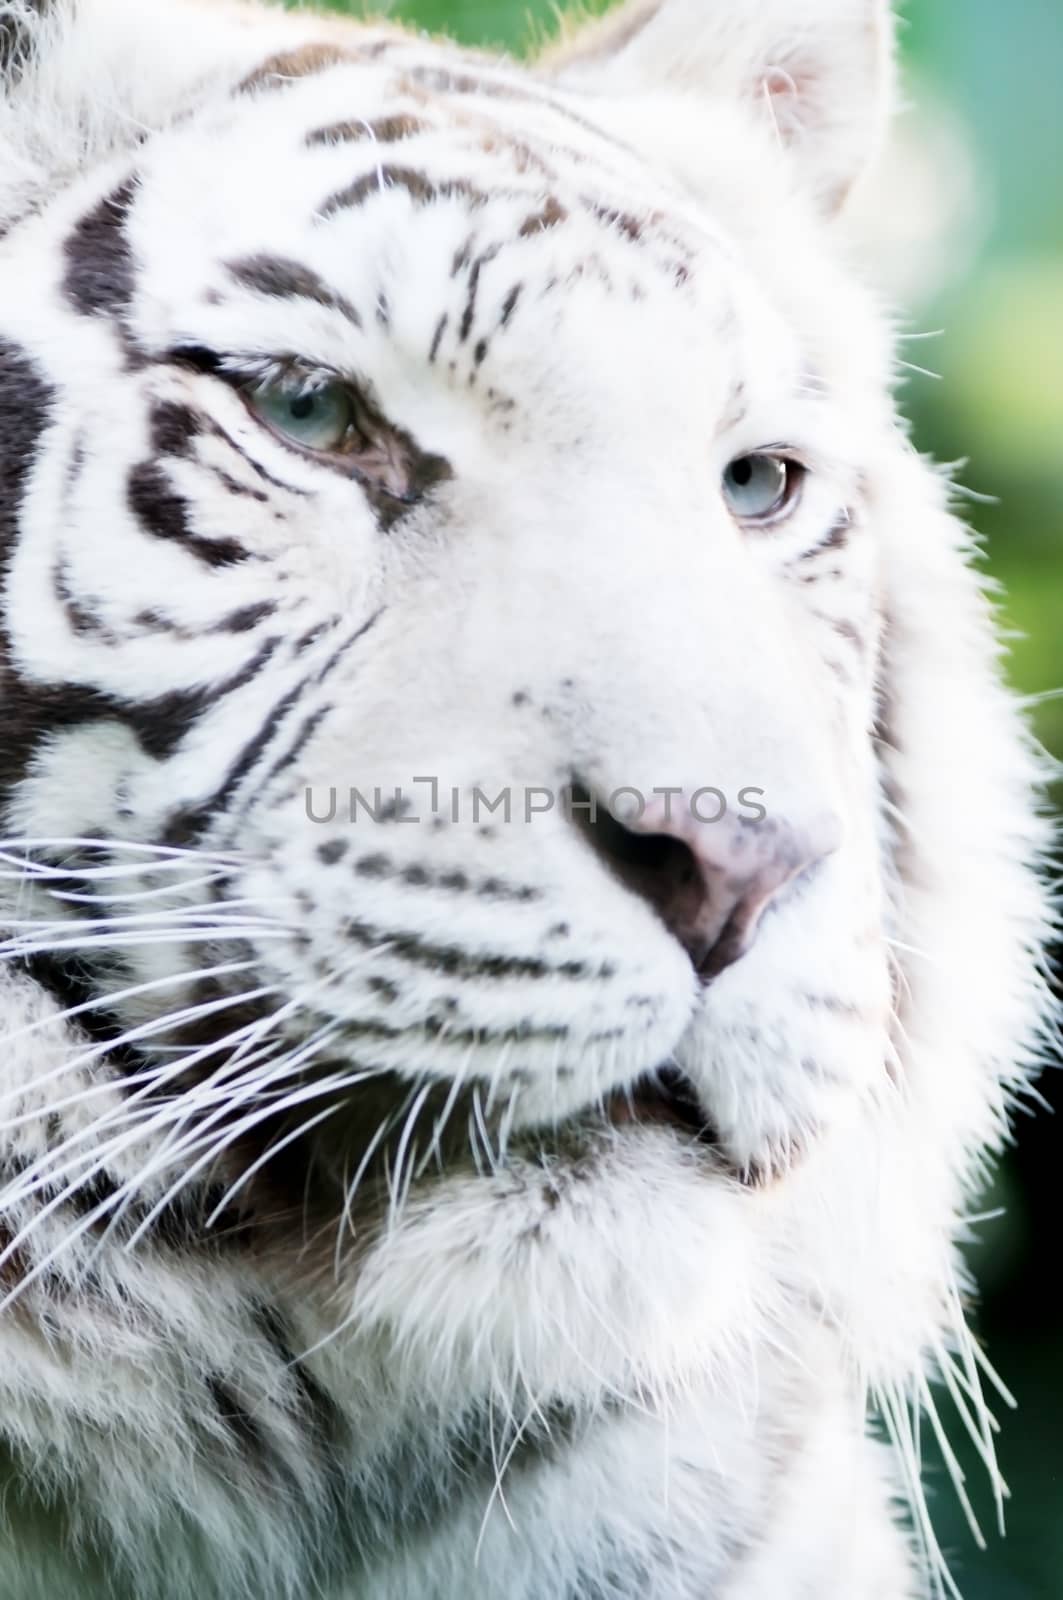 Closeup portrait of white tiger face and fur detail